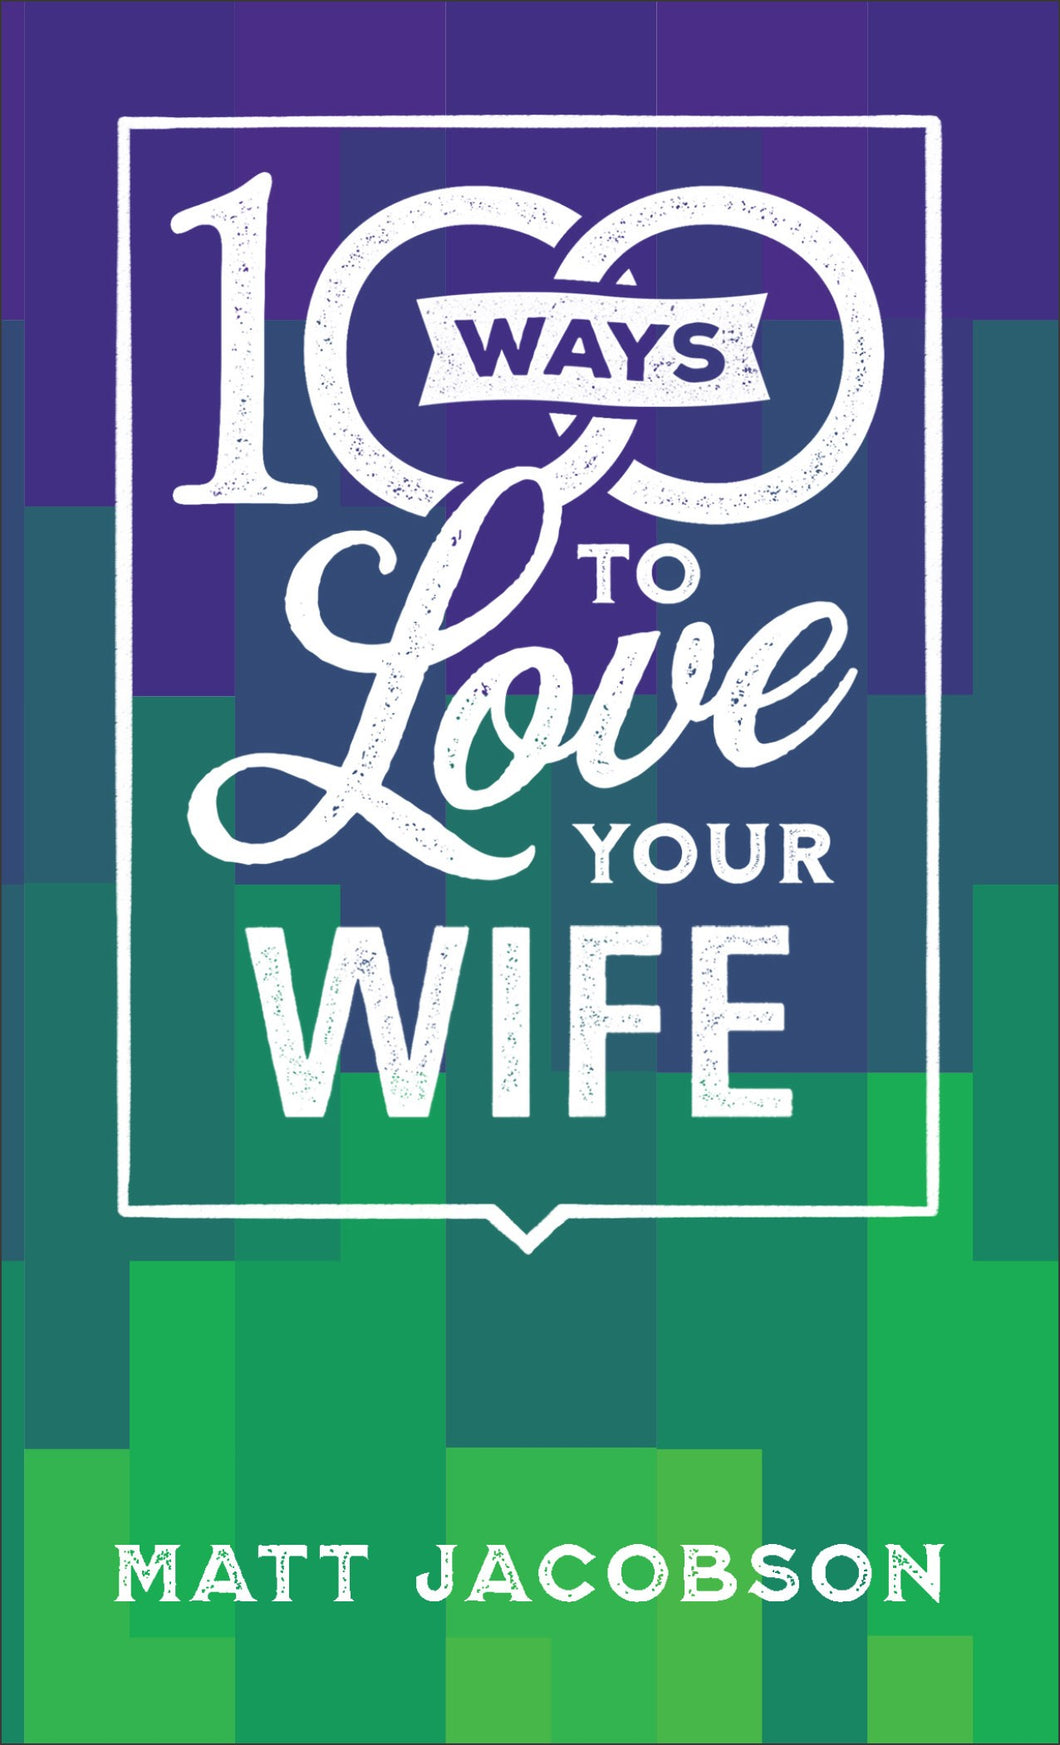 100 Ways To Love Your Wife